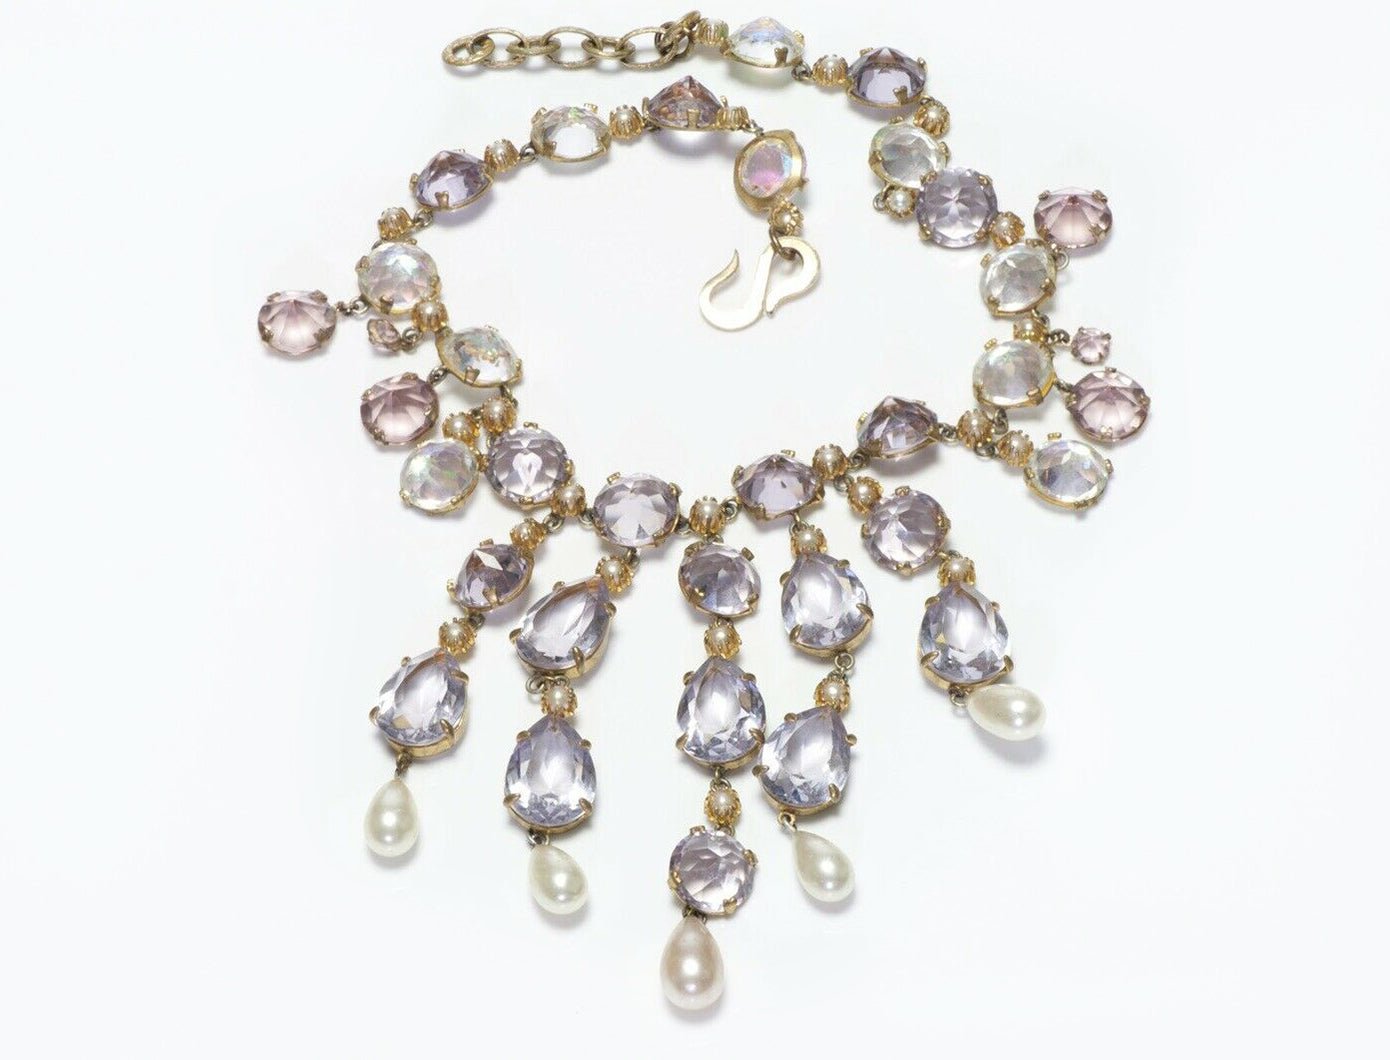 Christian Dior 1950’s by Yves Saint Laurent Purple Crystal Pearl Collar Necklace